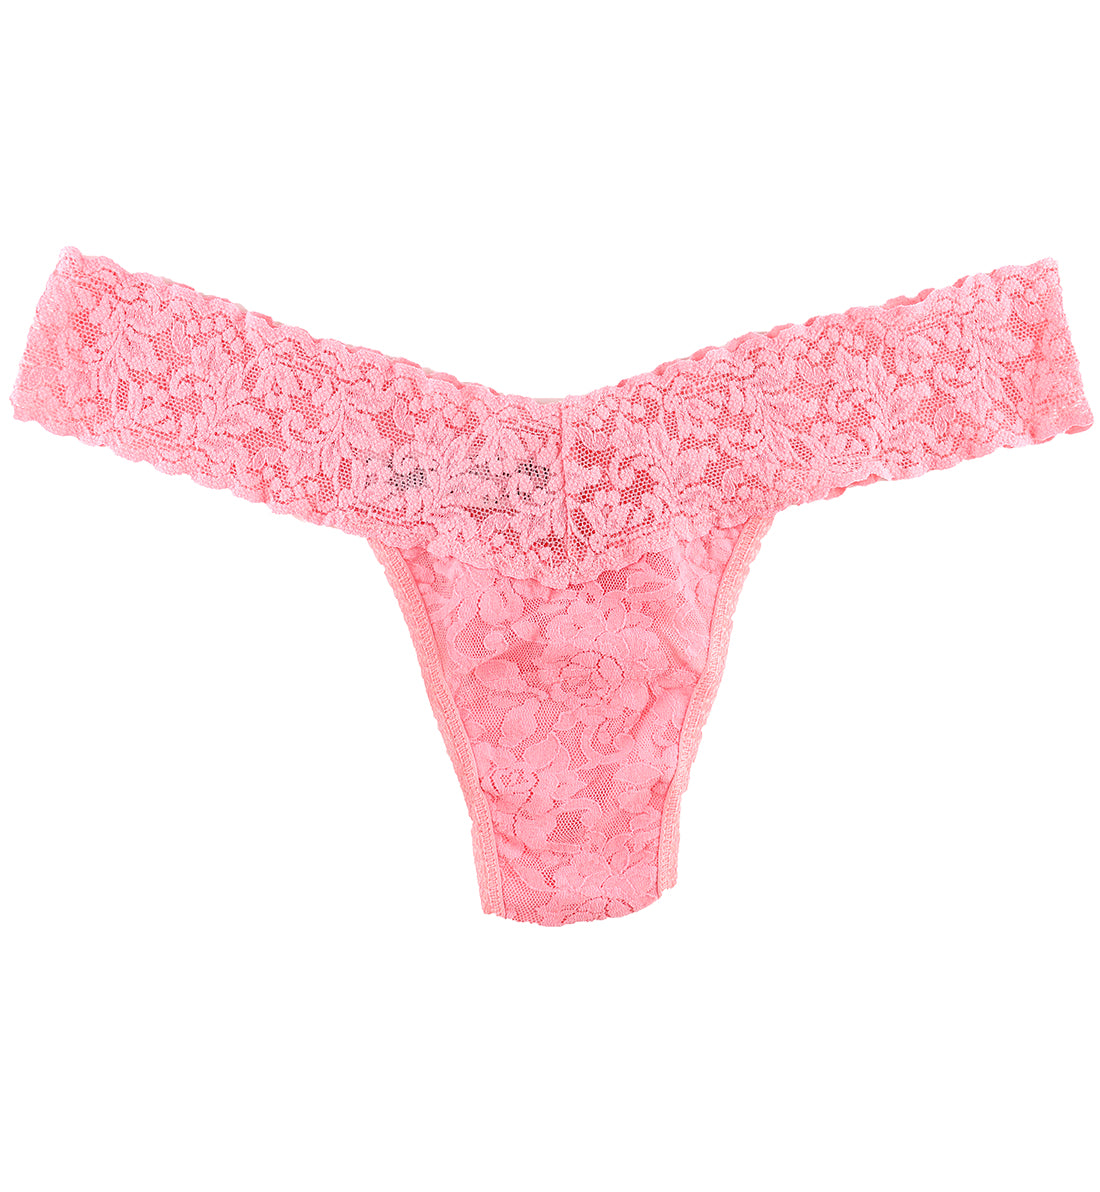 Hanky Panky Signature Lace Low Rise Thong (4911P),Pink Lady - Pink Lady,One Size